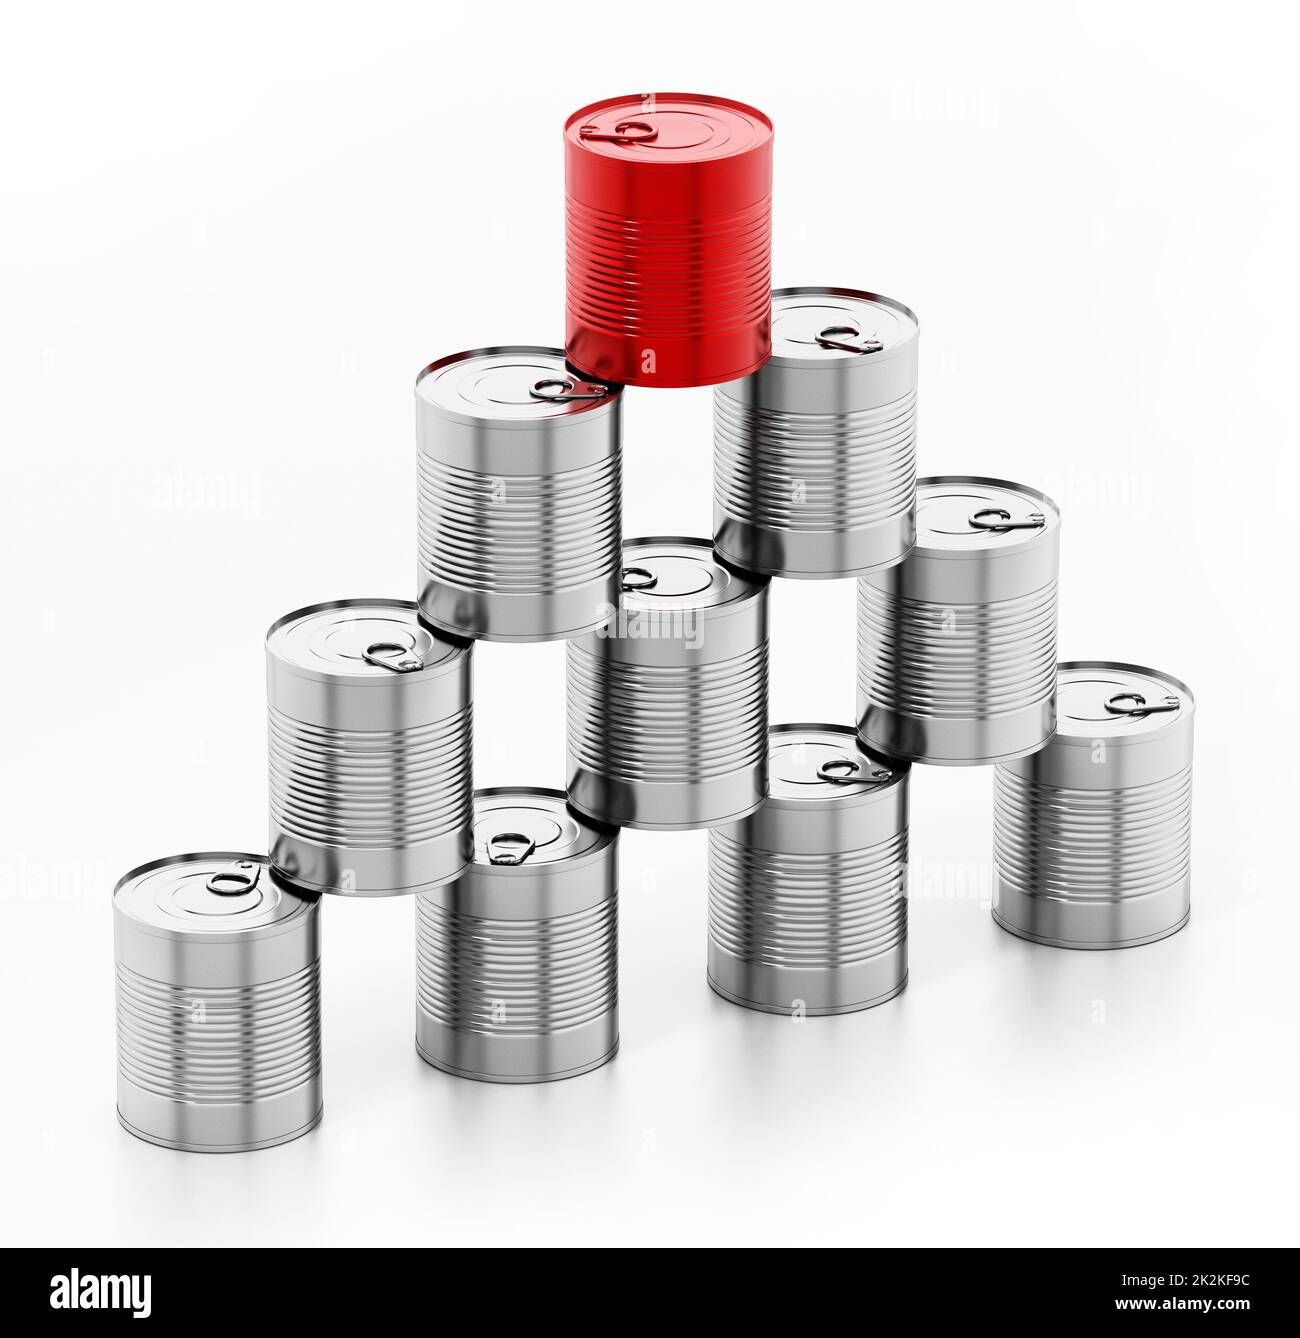 Tower of tin cans with one red can isolated on white background. 3D illustration Stock Photo